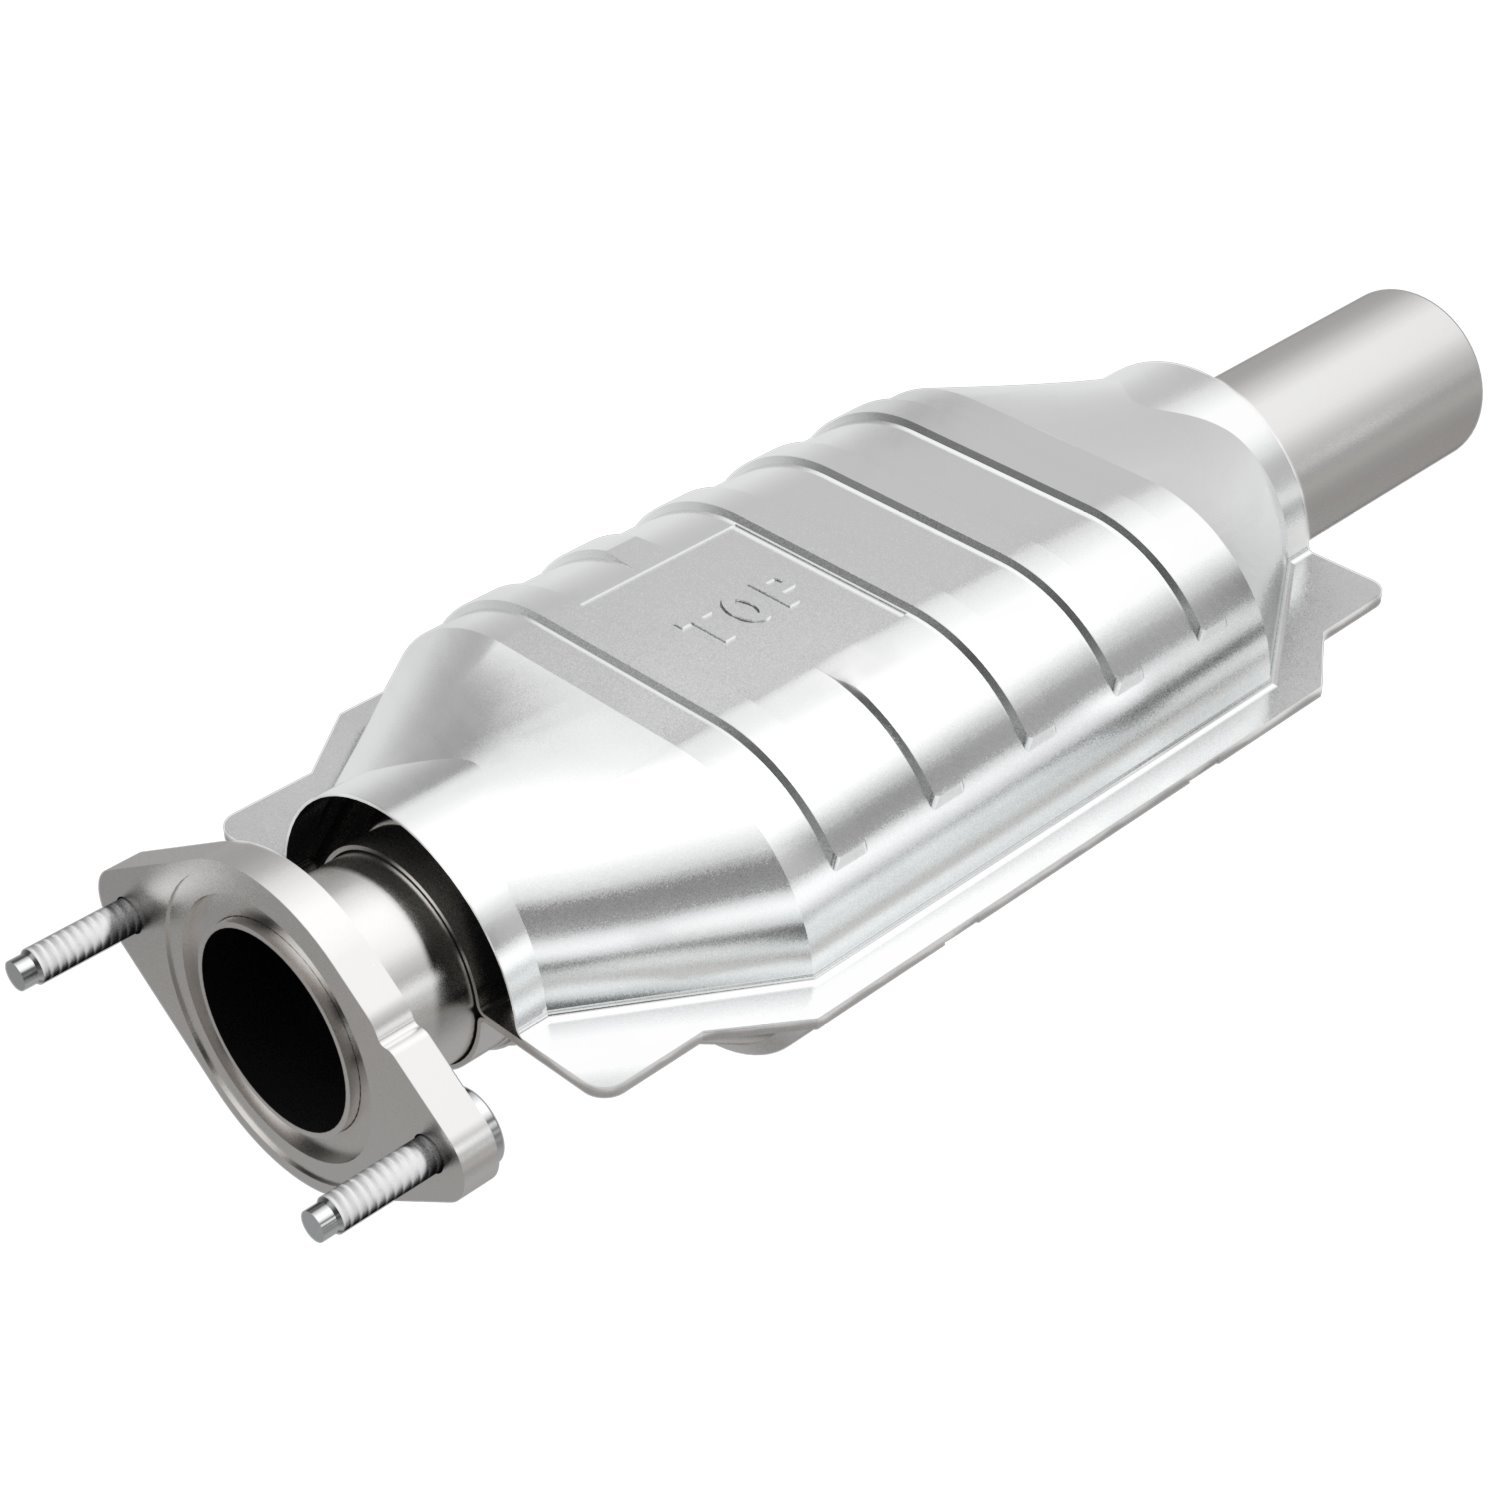 HM Grade Federal / EPA Compliant Direct-Fit Catalytic Converter 25206